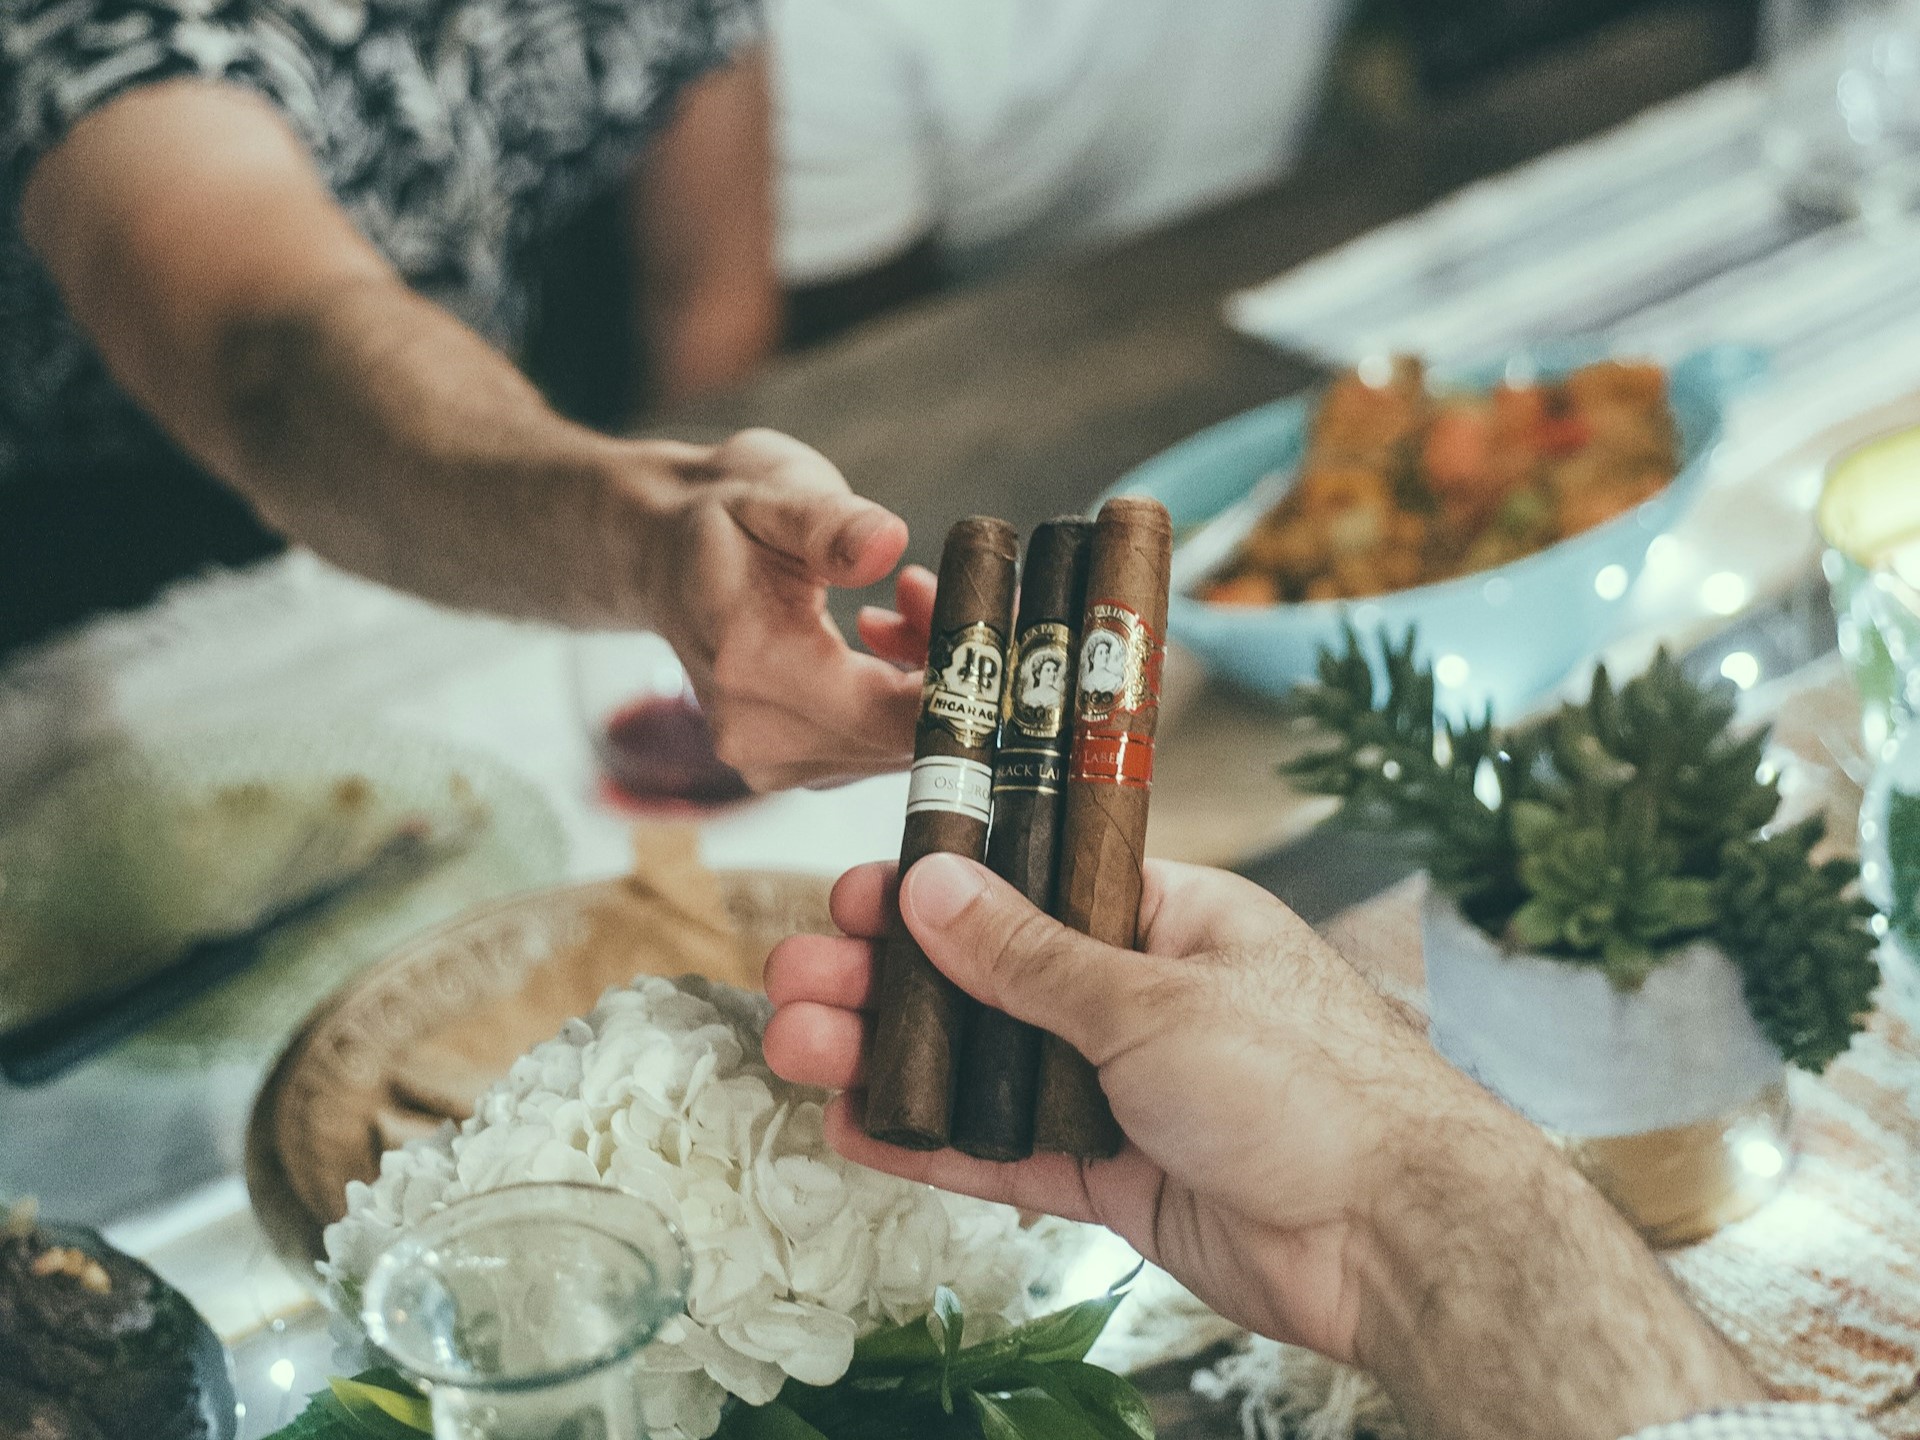 Man passes a few La Palina cigars to a friend across the dining table.